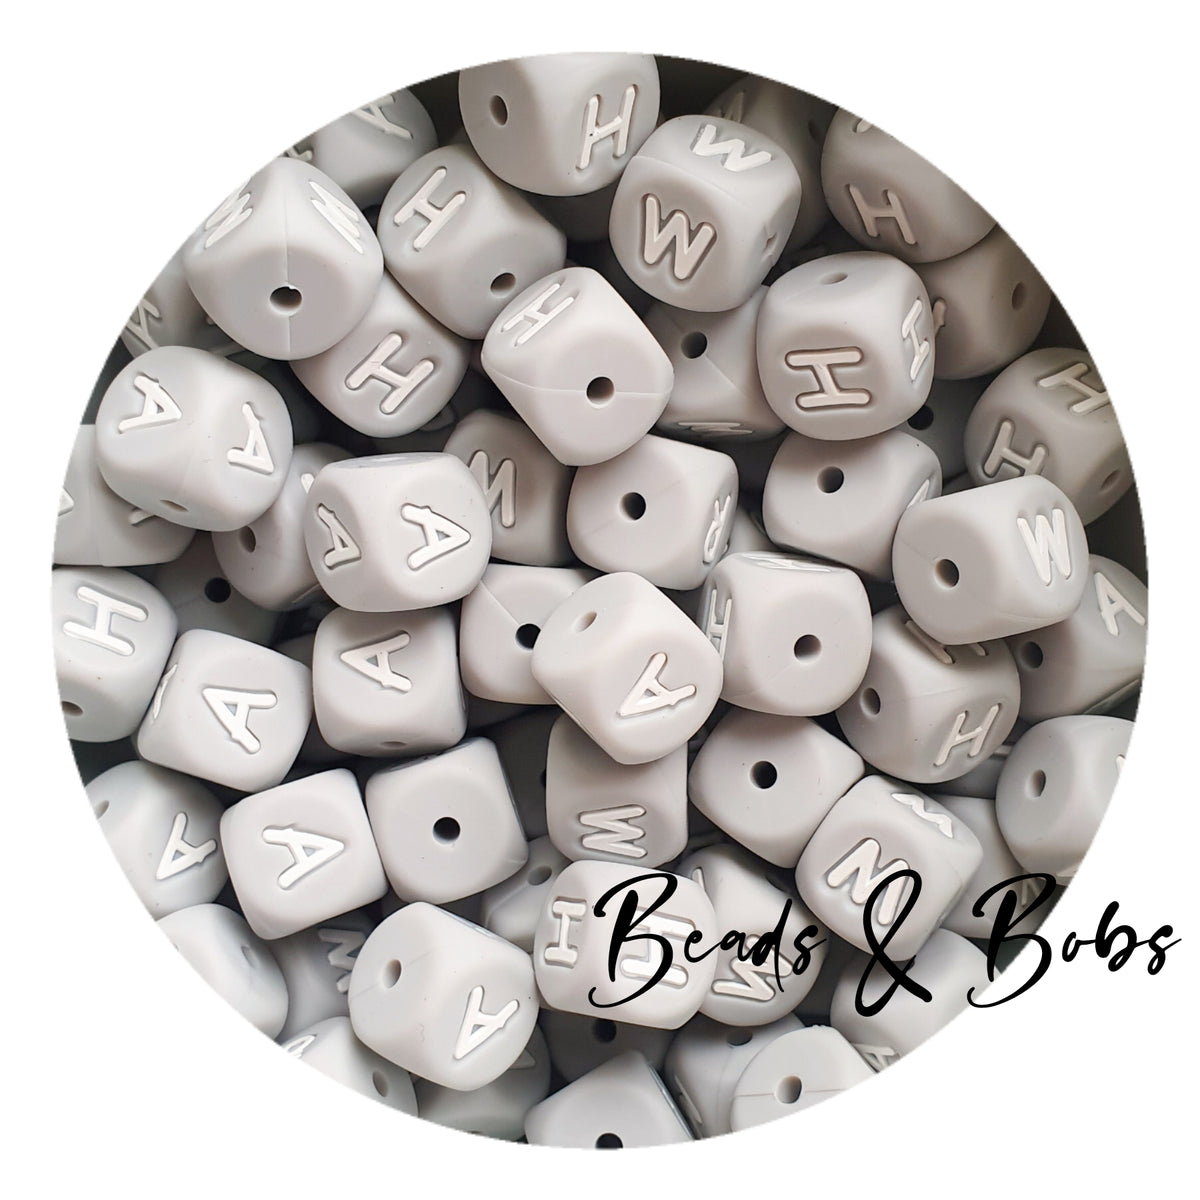 Wholesale 20Pcs Grey Cube Letter Silicone Beads 12x12x12mm Square